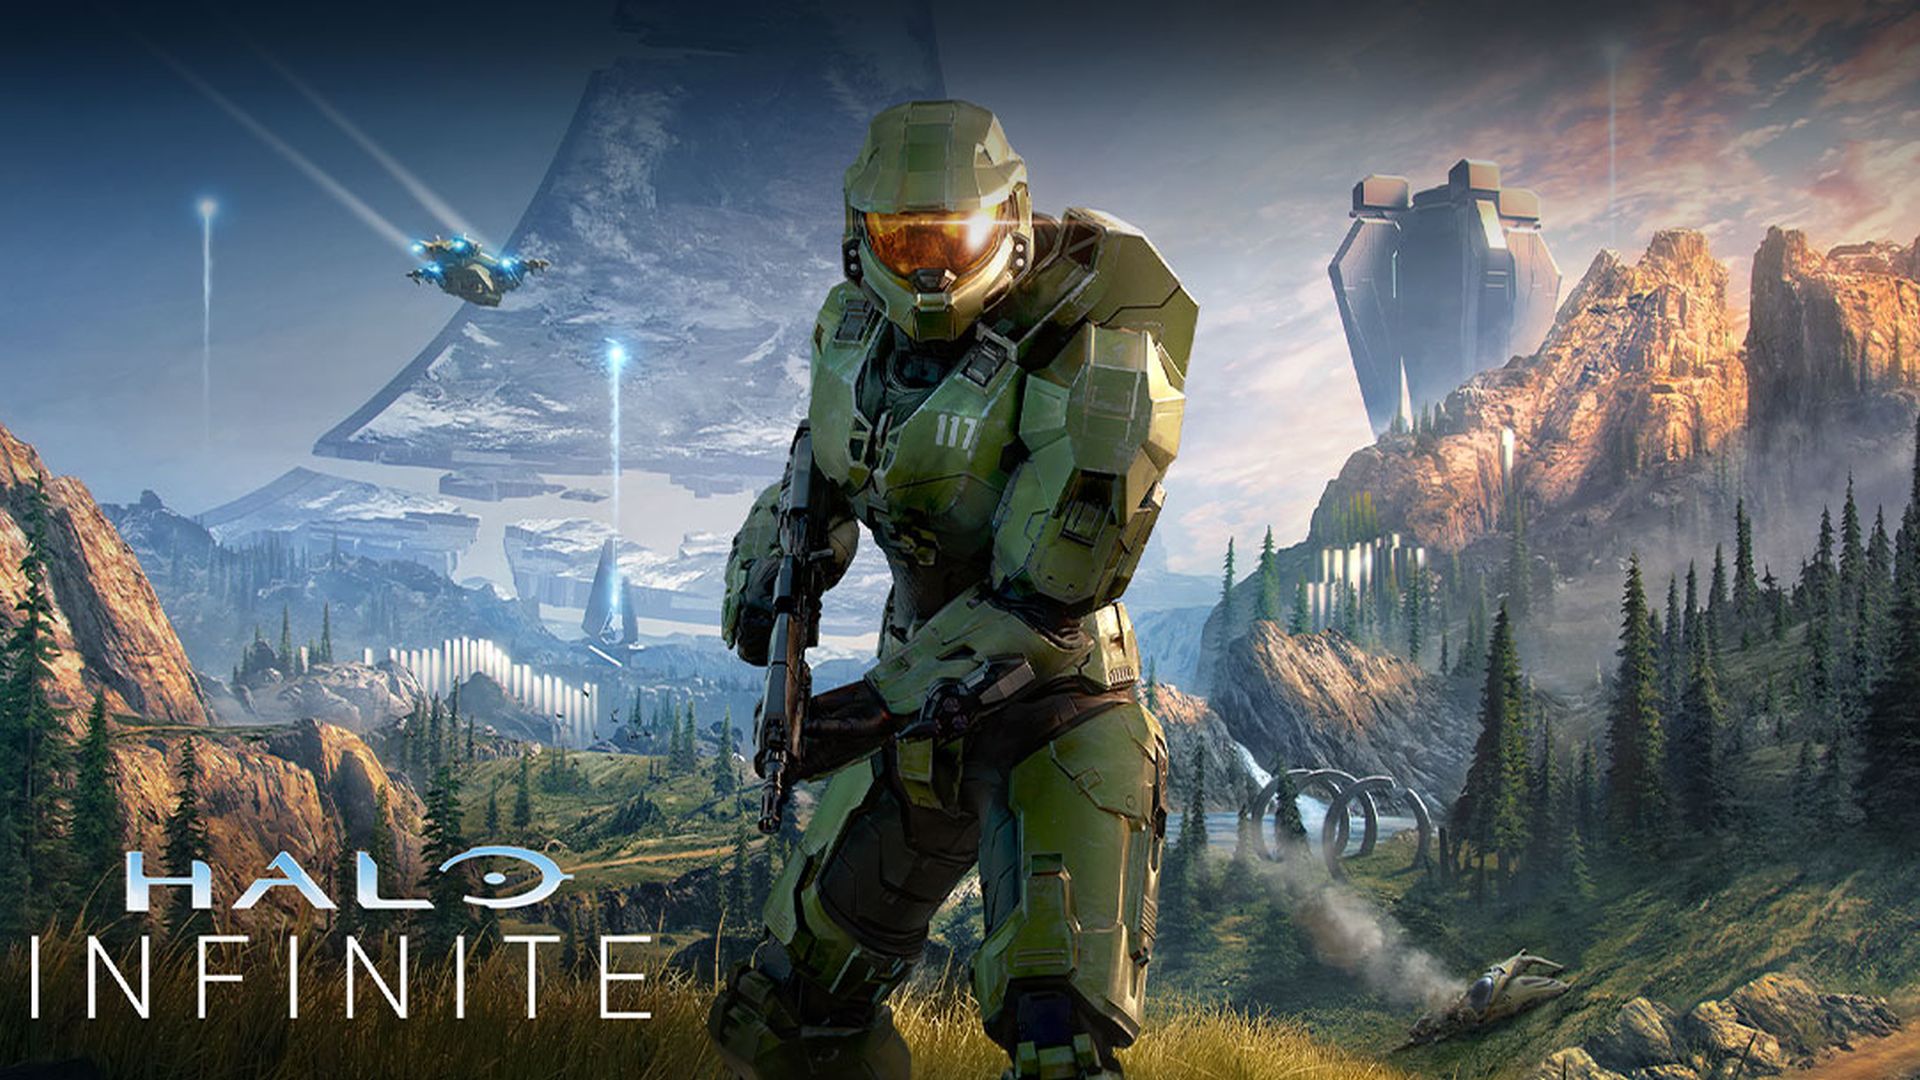 10 Best Halo Games of All-Time | GamesRadar+